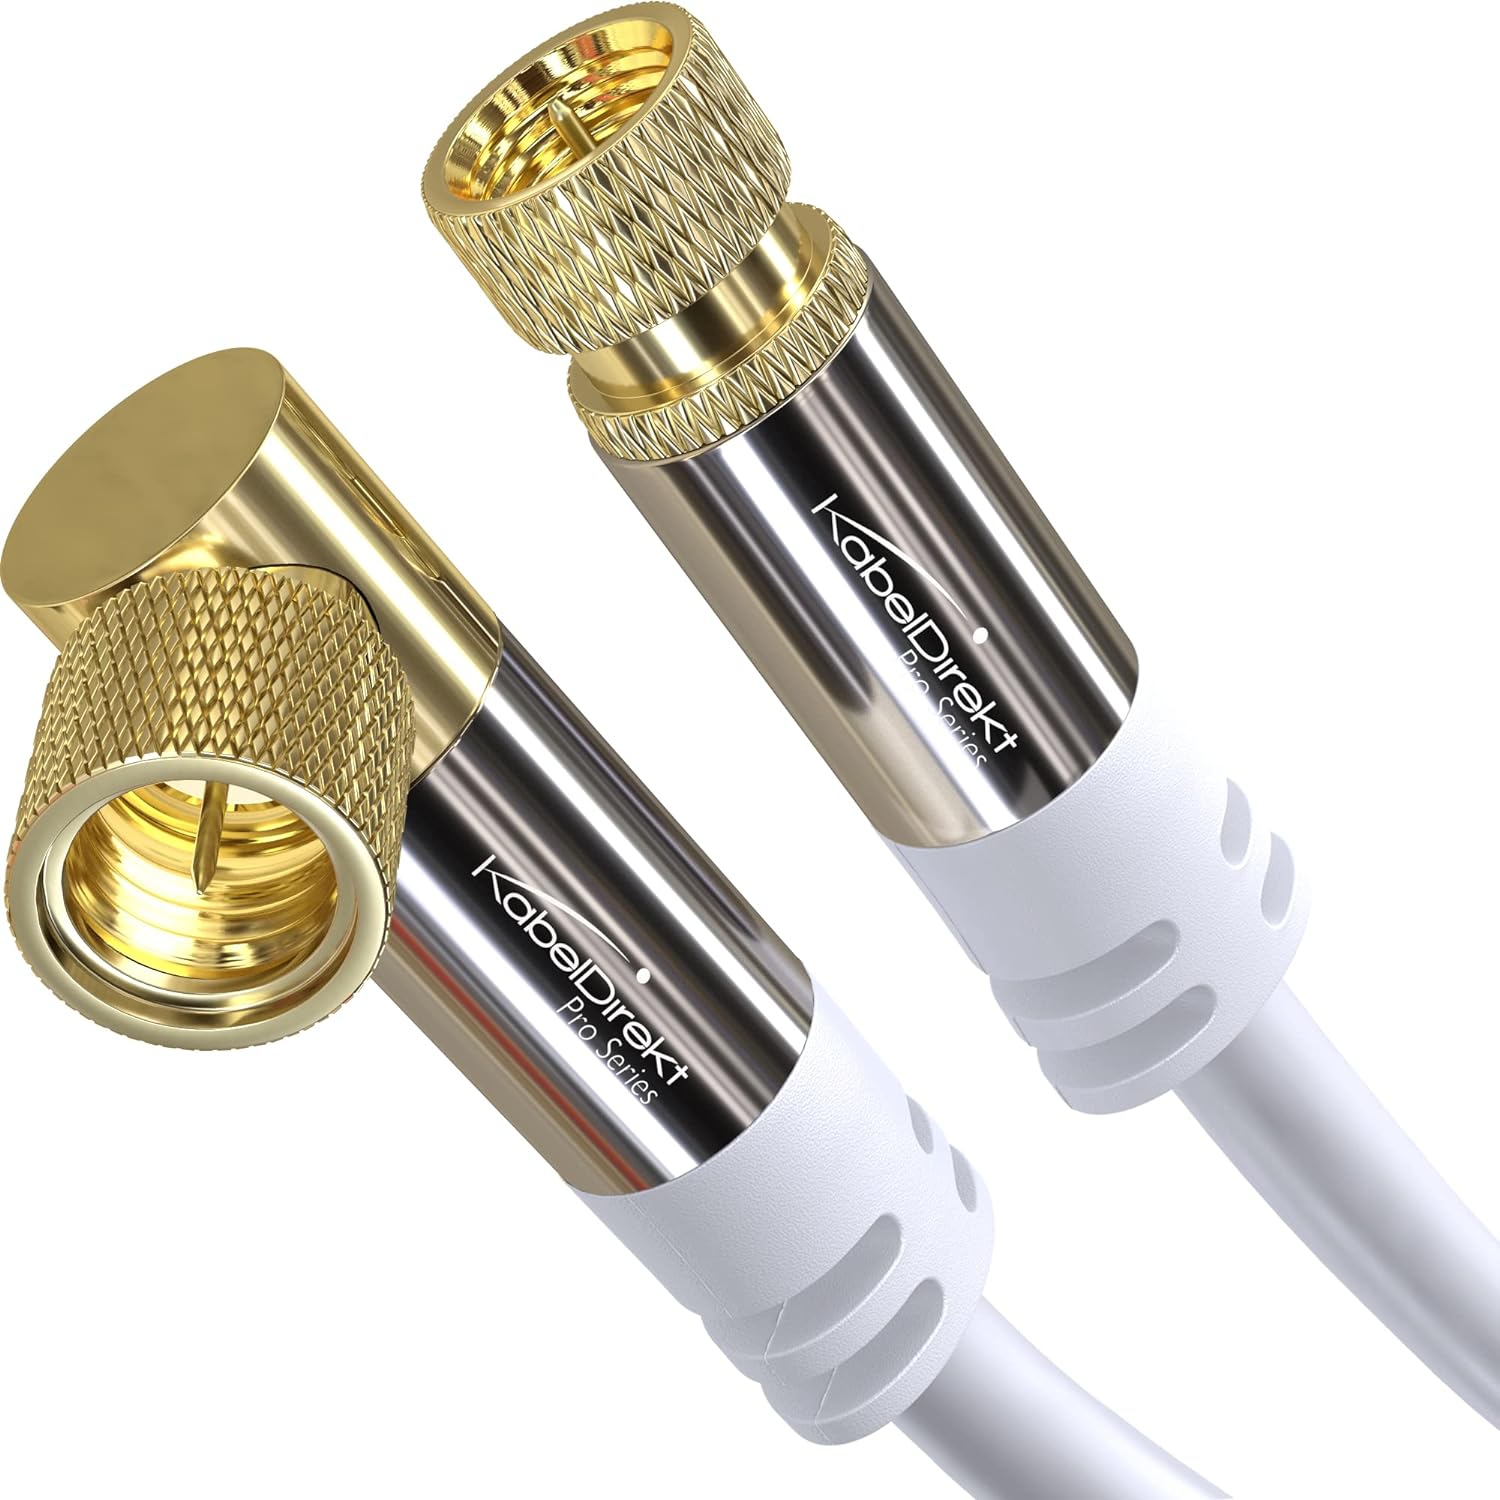 CableDirect – SAT Cable, coaxial, Satellite Cable, 90°/Straight connectors  – TV Cable with Multi-Layer Shielding, Break-Proof Metal F connectors –